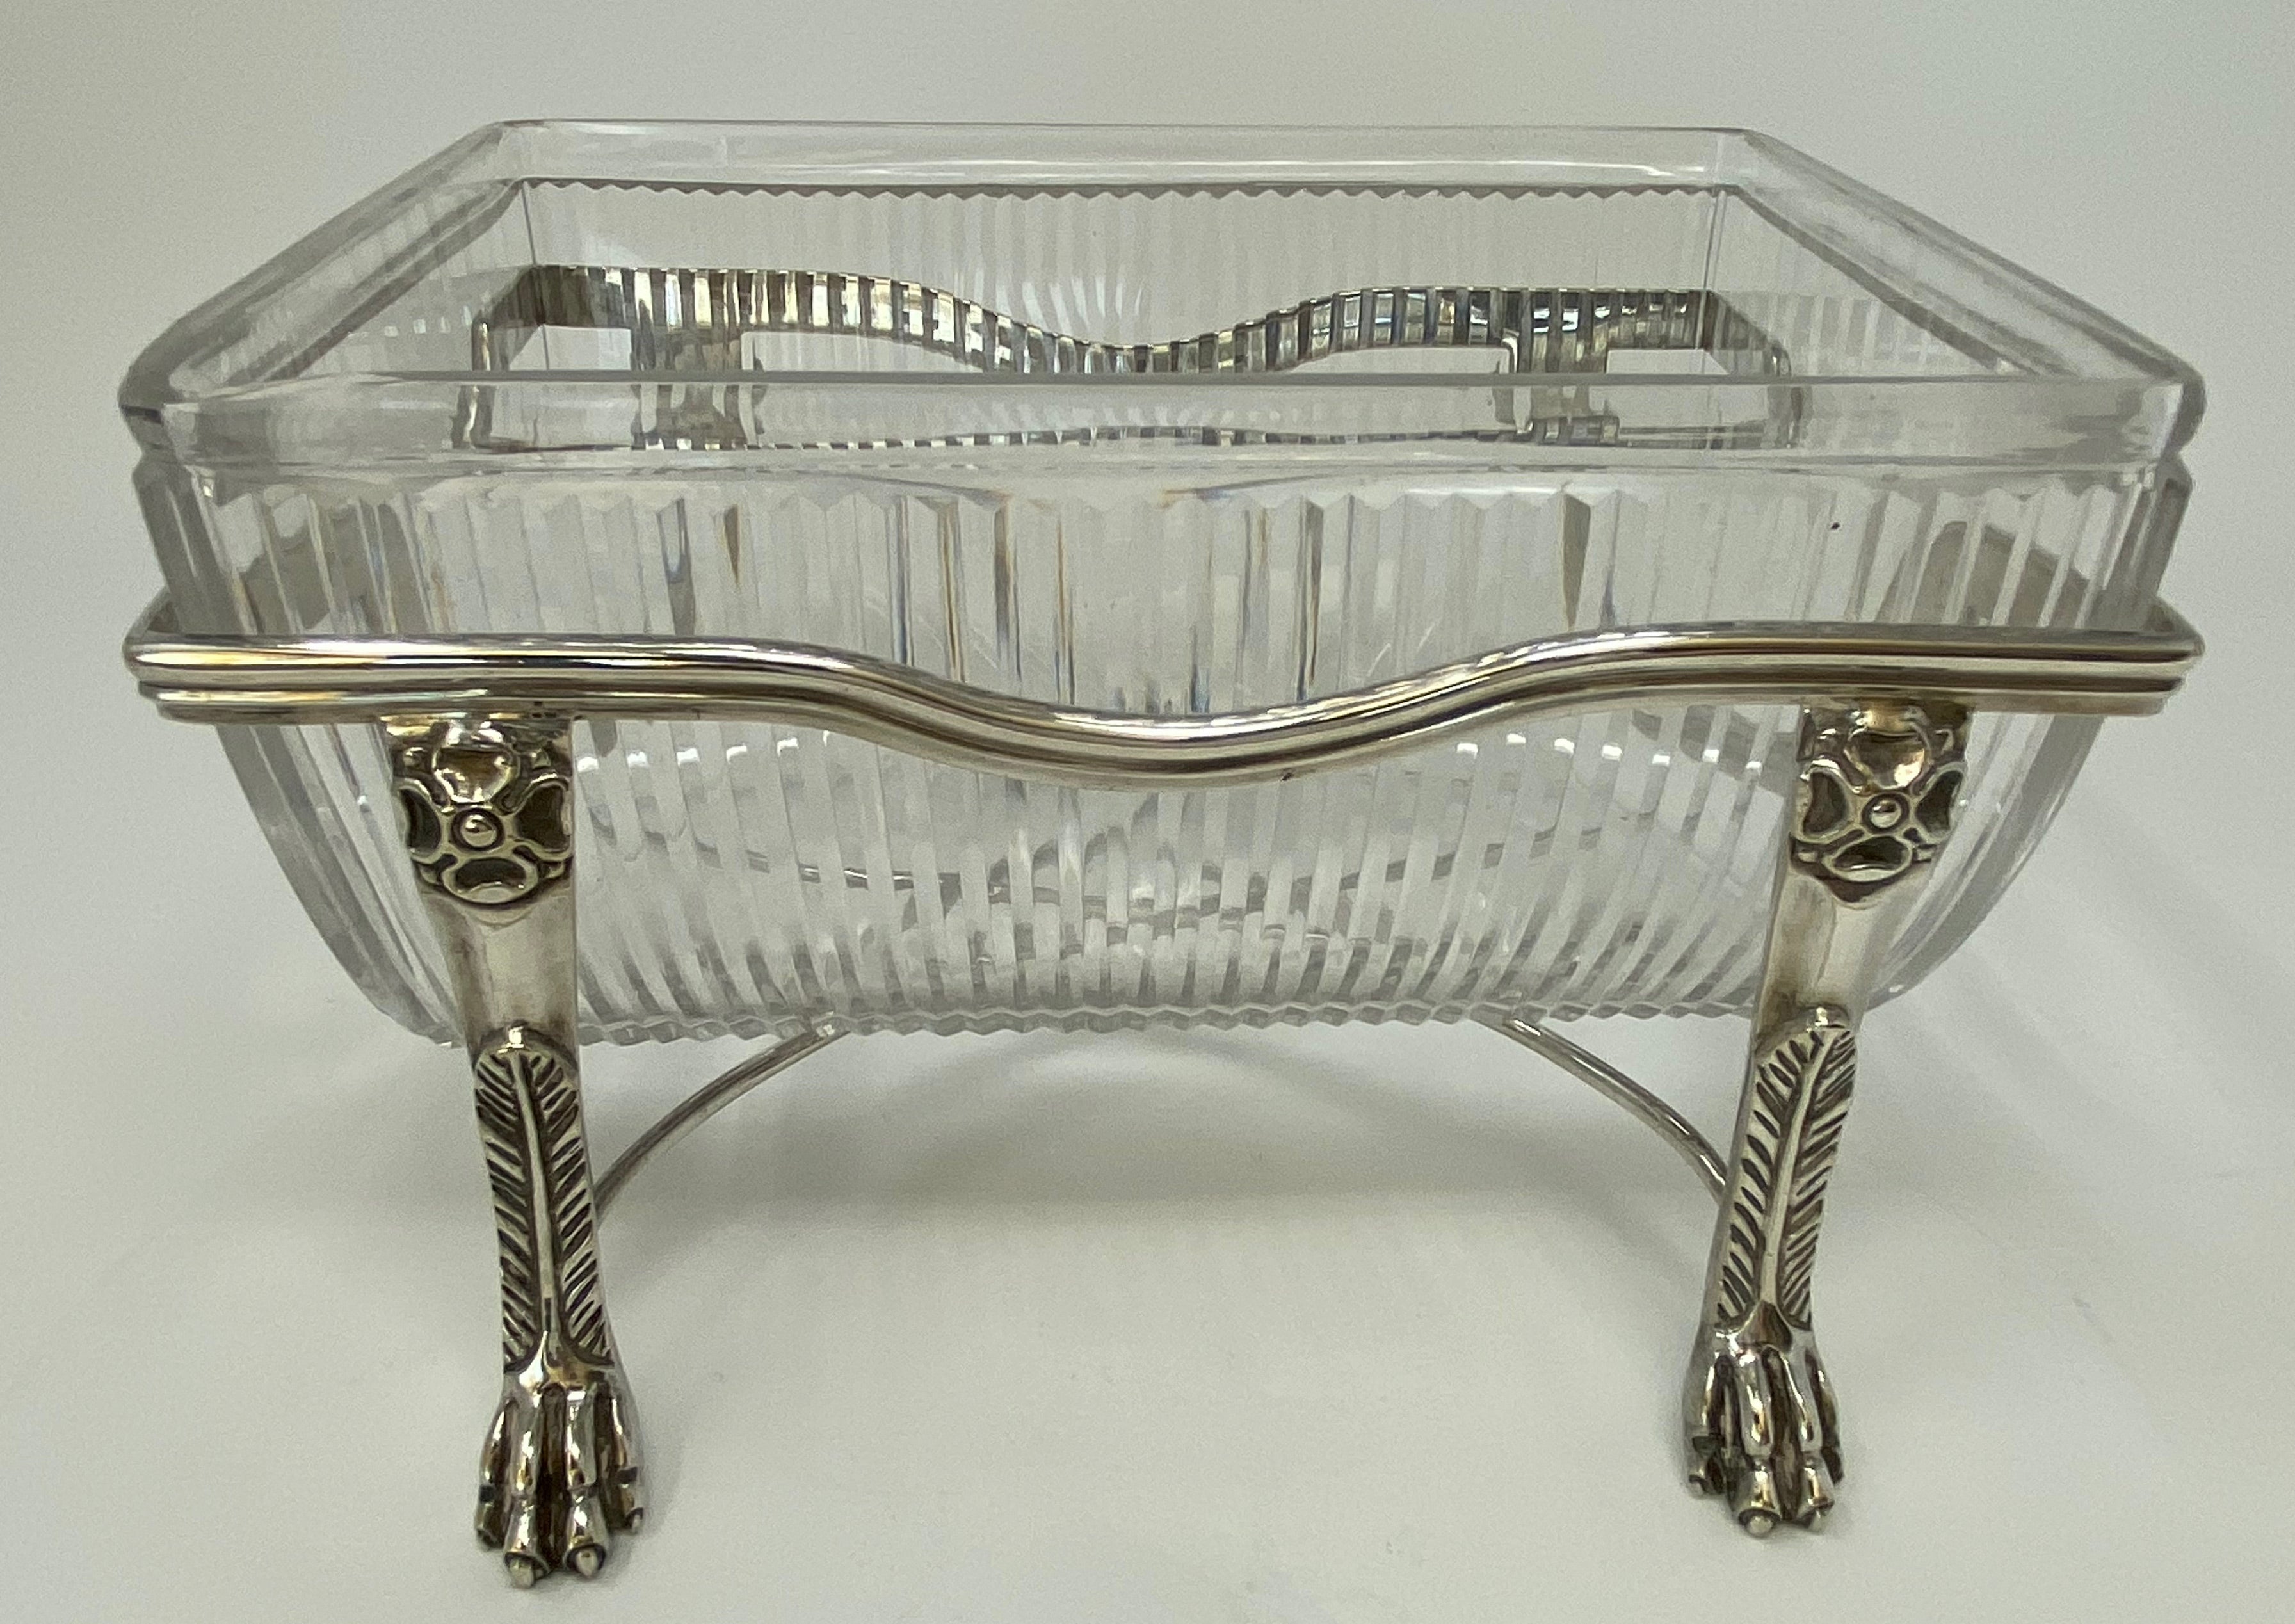 Antique Victorian Silver Plate and Cut Glass Bowl in Stand